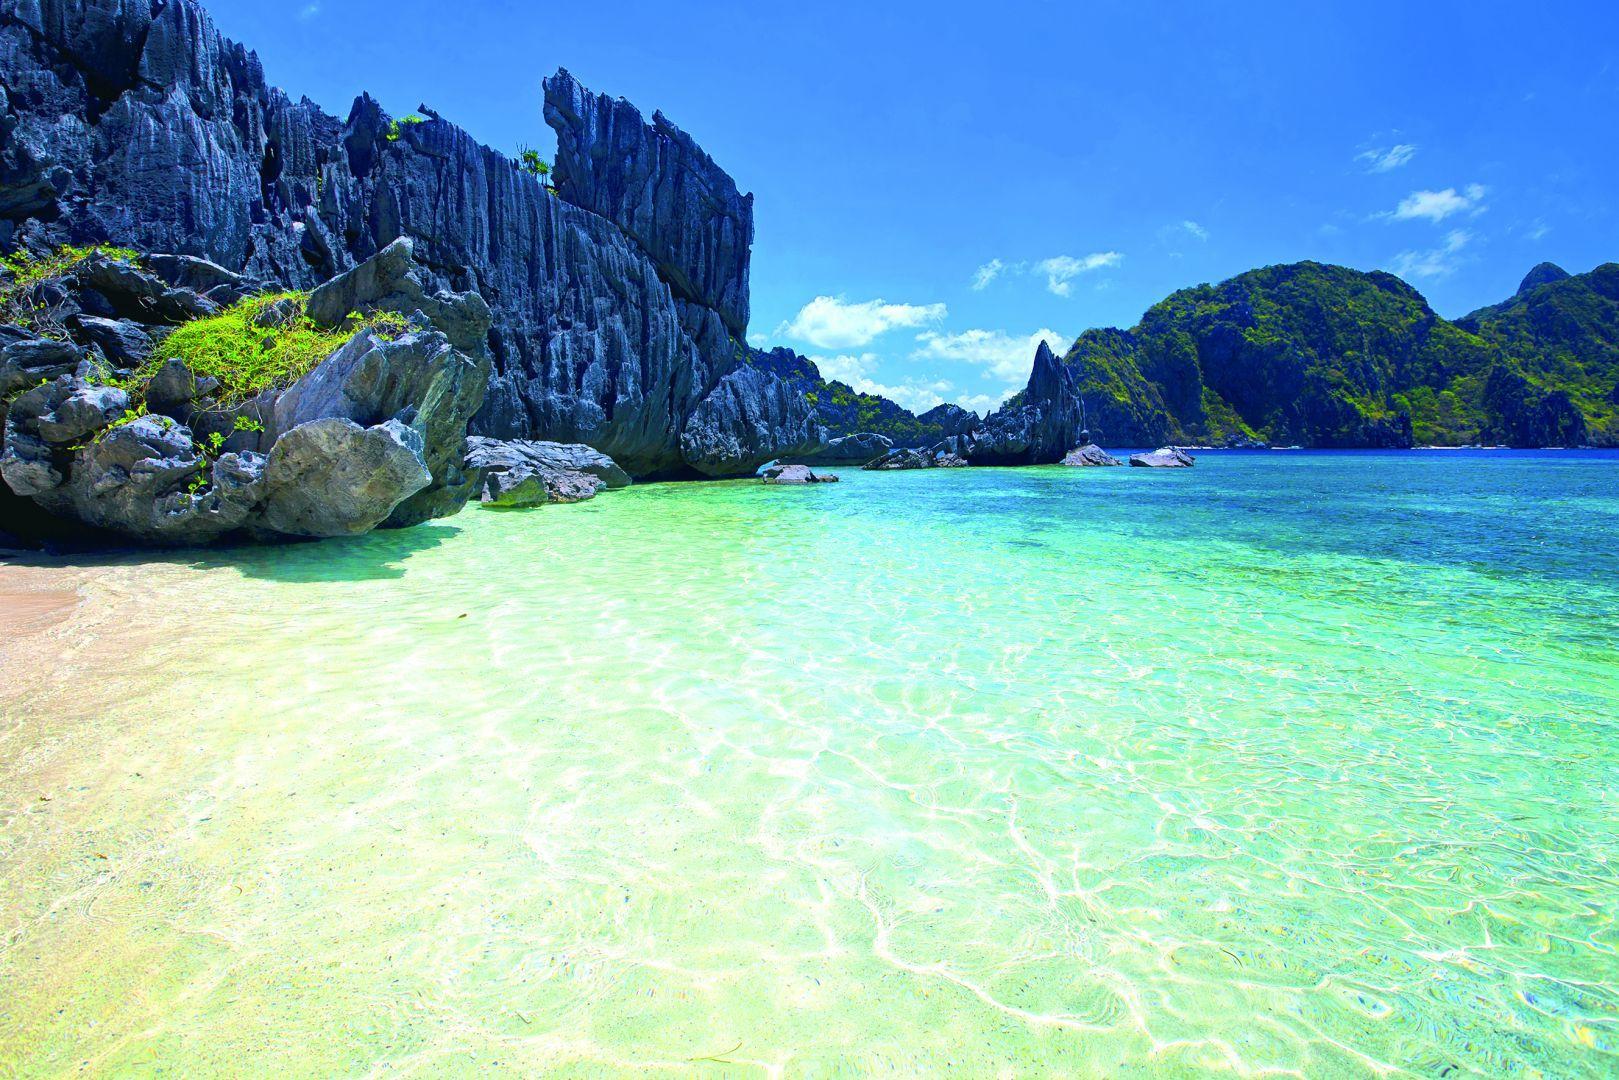 Philippine Beaches Wallpapers Top Free Philippine Beaches Backgrounds Wallpaperaccess Kulturaupice